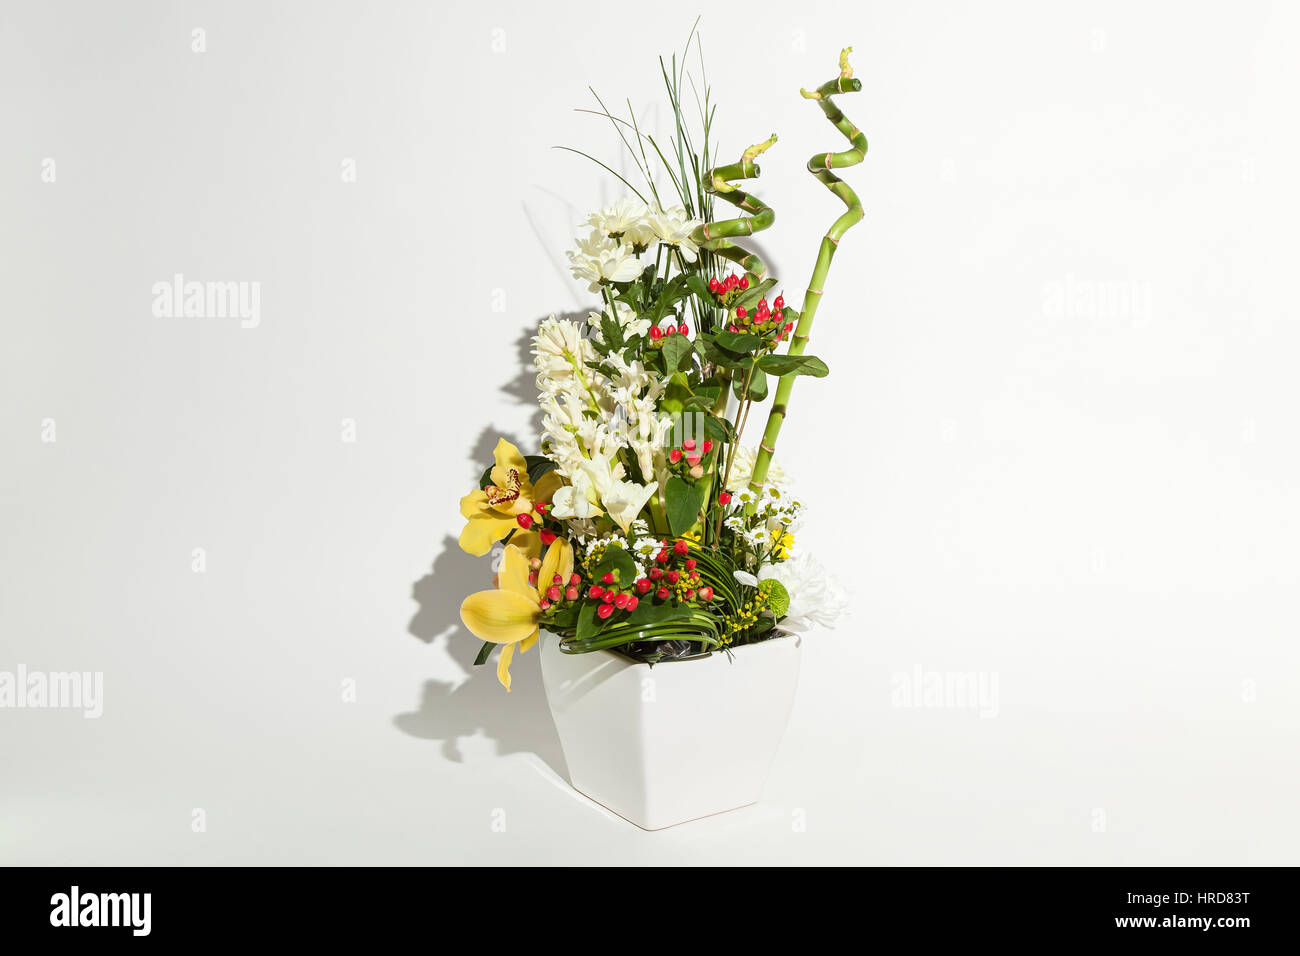 colorful floral bouquet of orchids, chrysanthemums,  and red hypericums  in vase isolated on white background Stock Photo